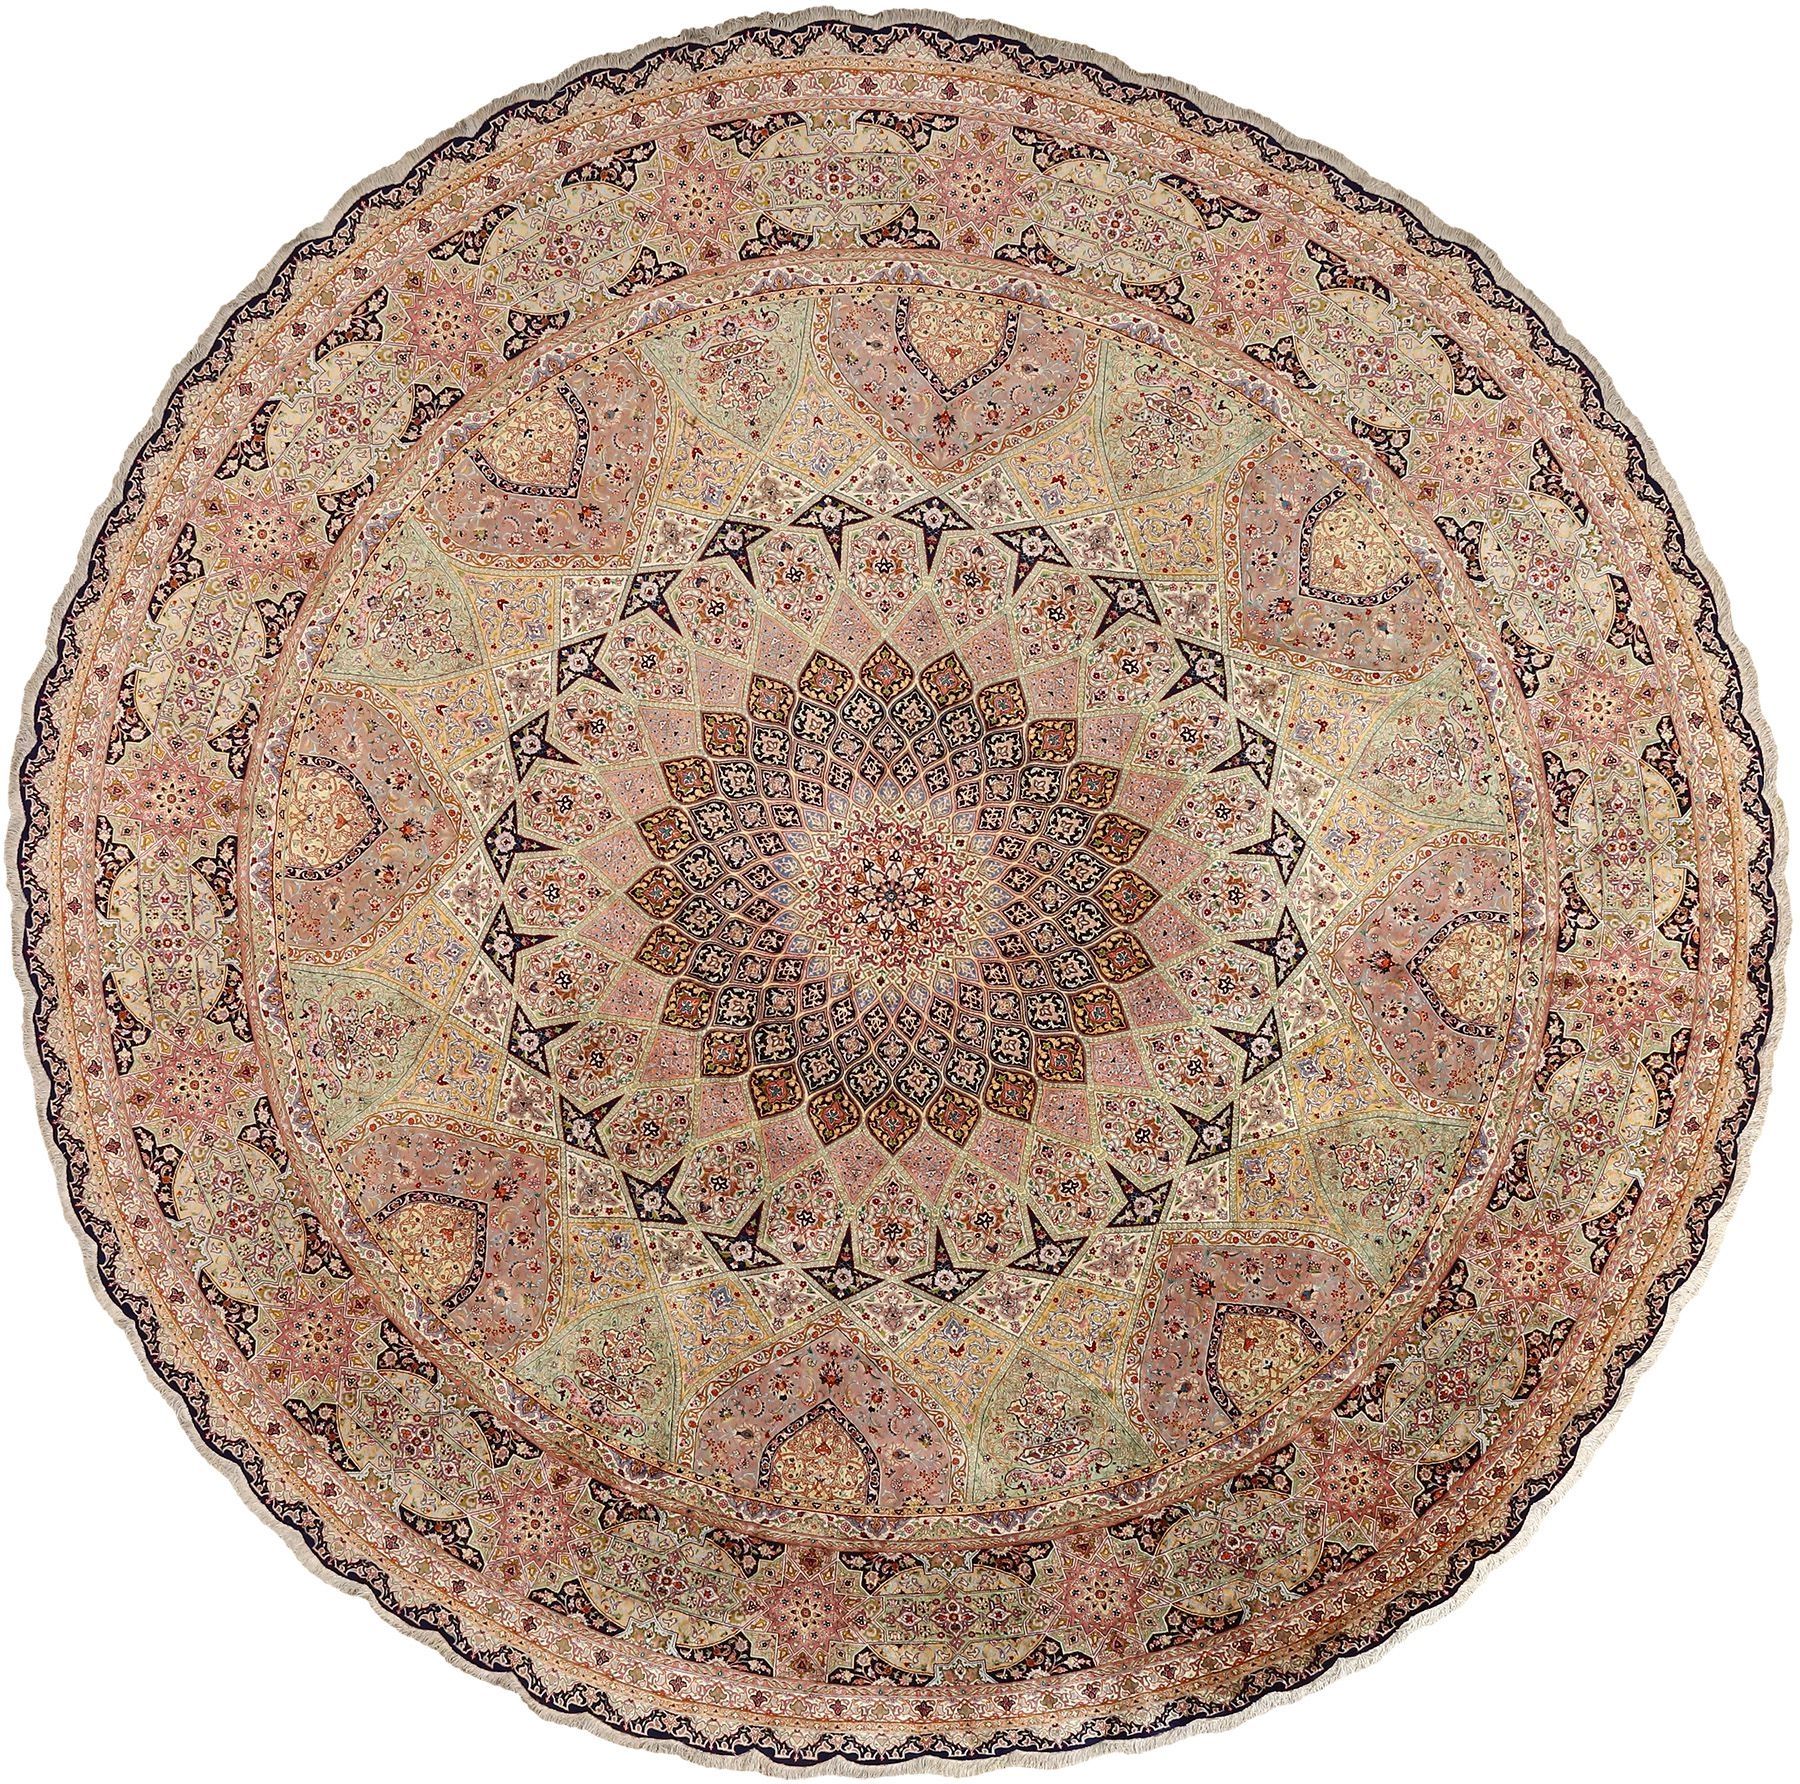 Round Rugs Round Carpets Oval Rugs Round Size Rugs And Carpets Pertaining To Circular Carpets (View 7 of 15)